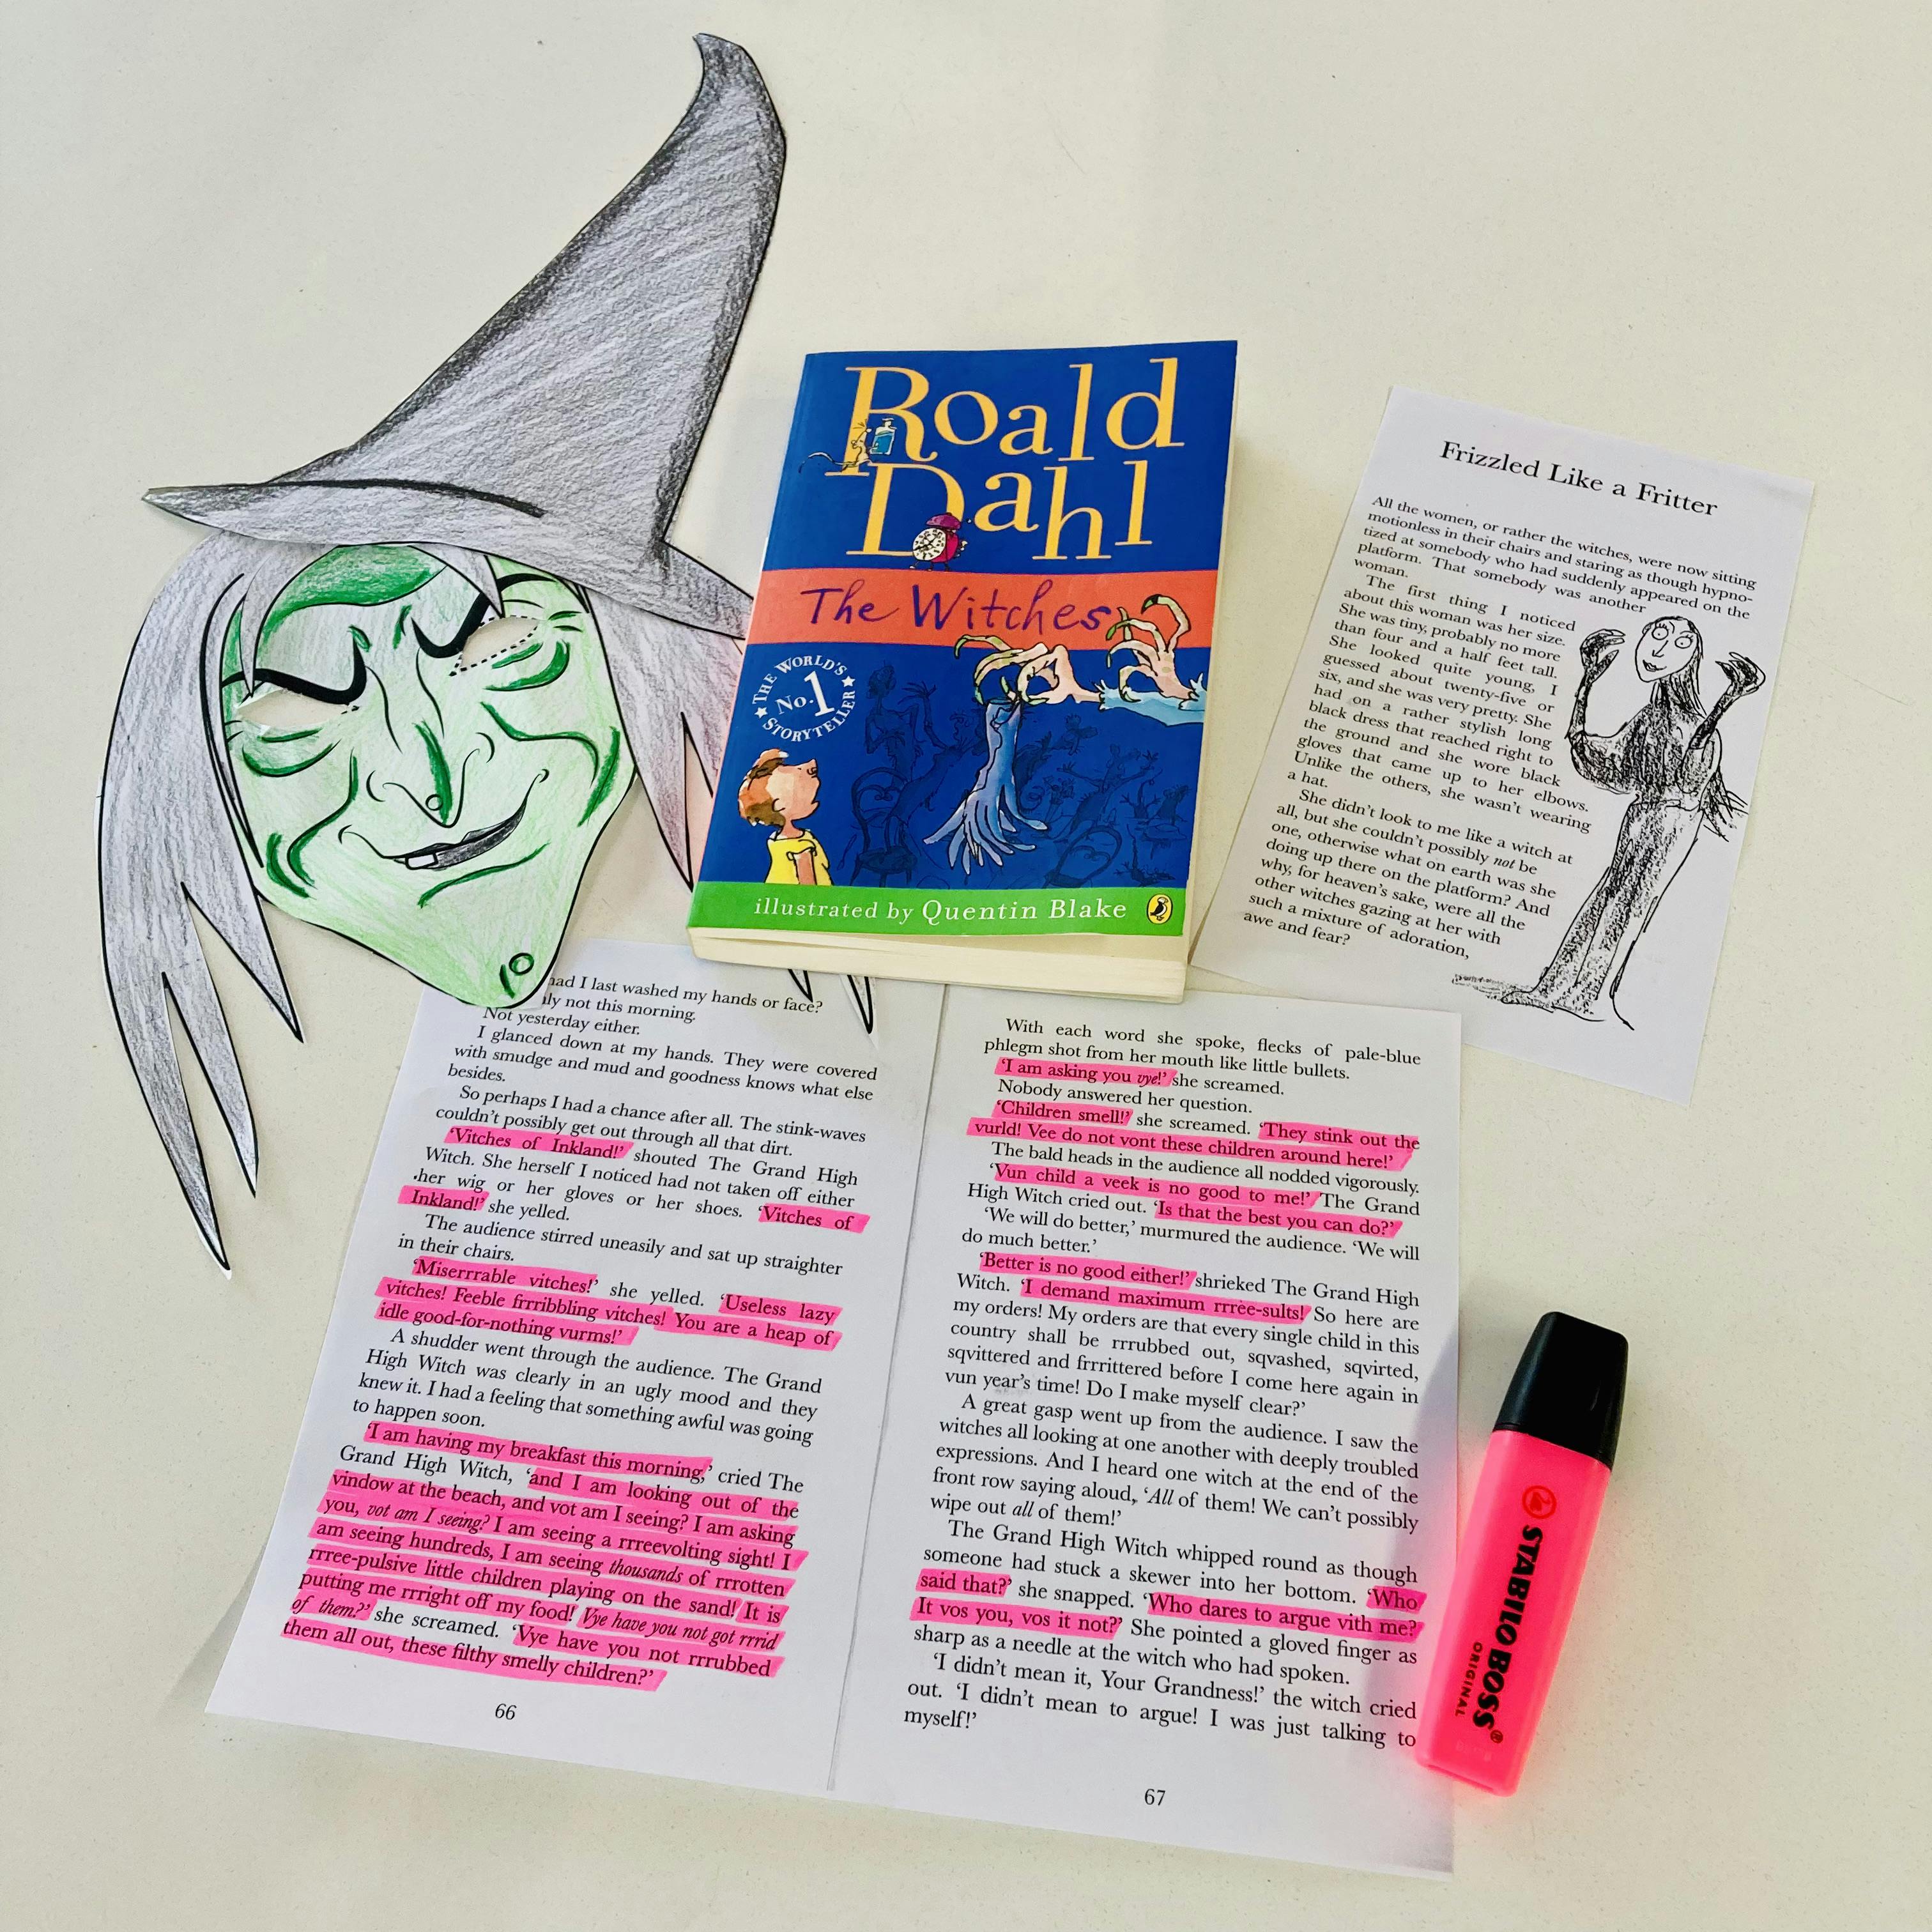 Using Expression With Roald Dahl Characters - The Witches